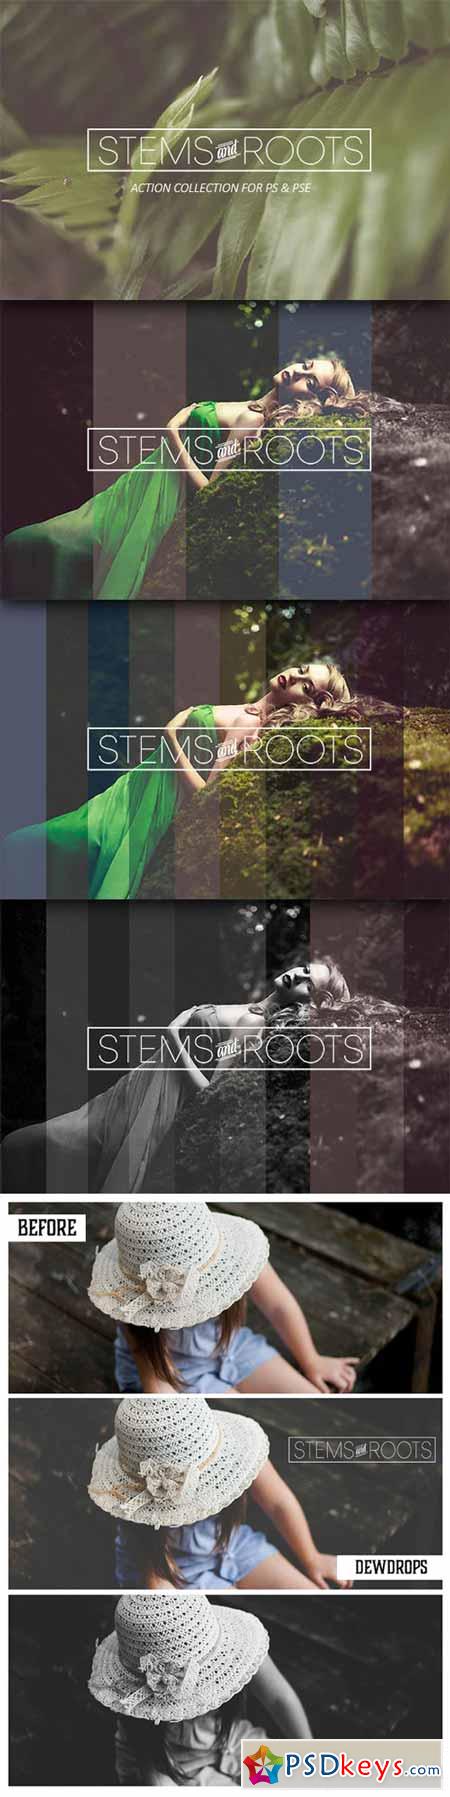 Stems & Roots Action Collection 264242